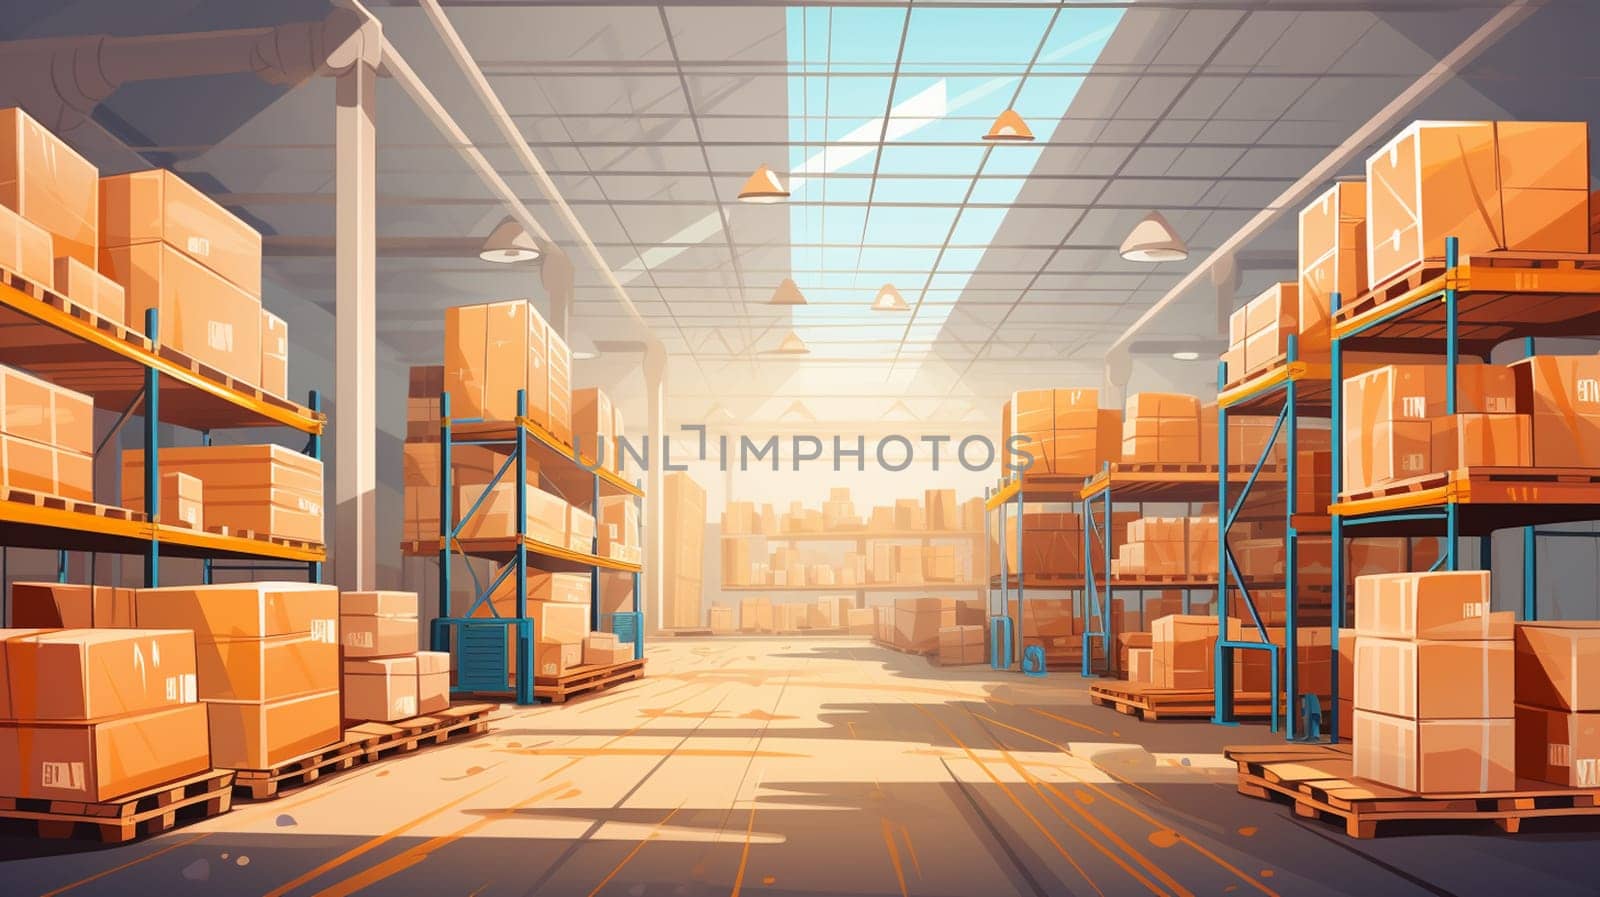 Warehouse with boxes. Storage interior. Cardboard boxes in hangar. Industrial warehouse with skylights.Hangar with warehouse racks. Storage area for industrial company. distribution, logistics by Andelov13